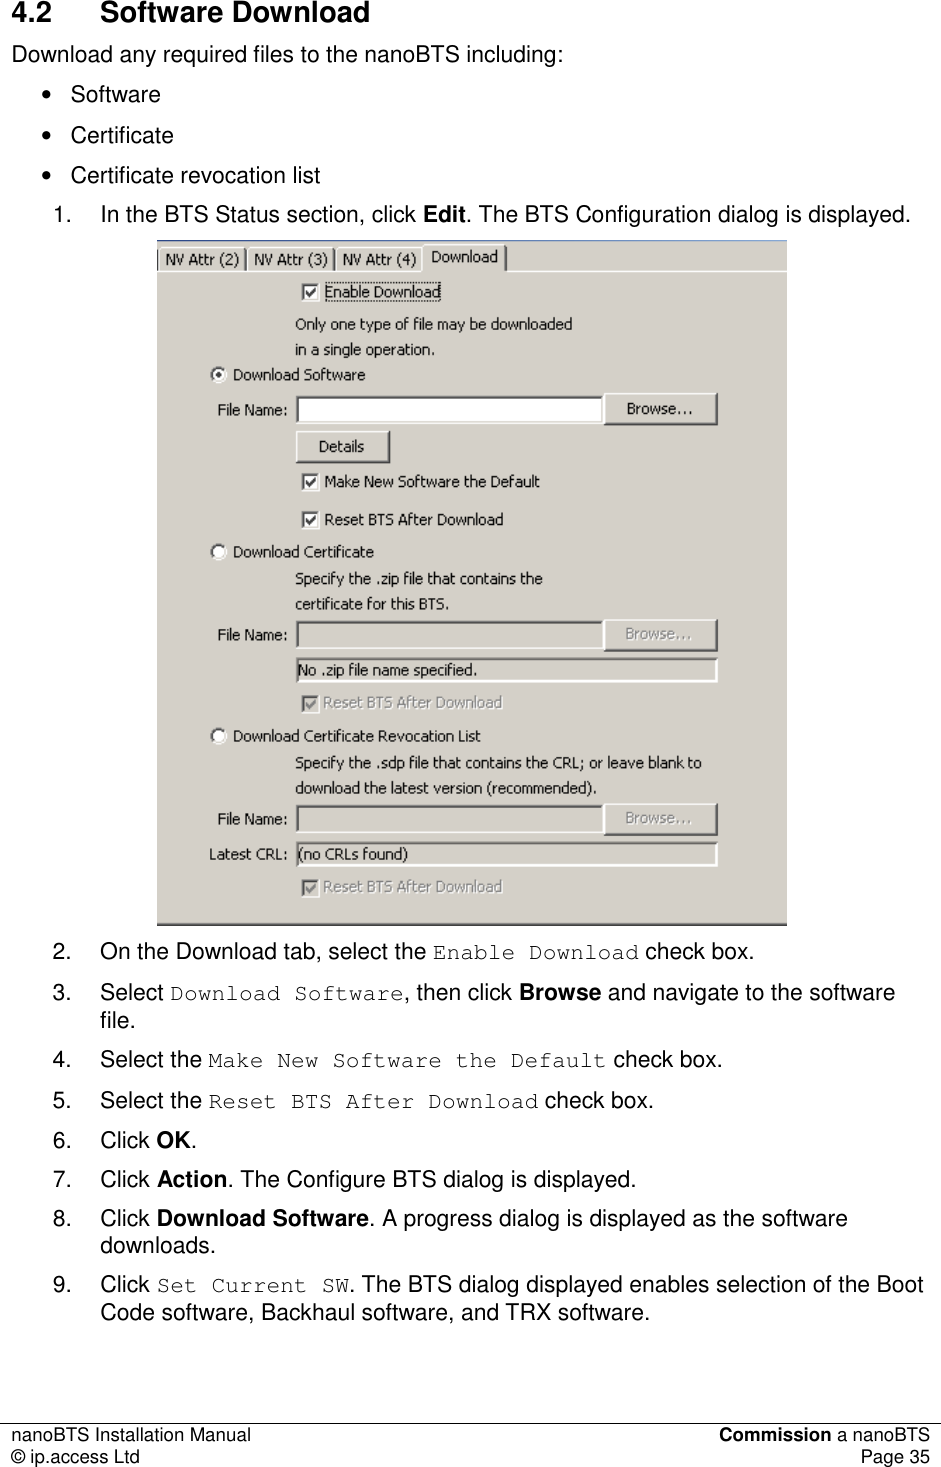 nanoBTS Installation Manual  Commission a nanoBTS © ip.access Ltd  Page 35  4.2  Software Download Download any required files to the nanoBTS including: •  Software •  Certificate •  Certificate revocation list 1.  In the BTS Status section, click Edit. The BTS Configuration dialog is displayed.   2.  On the Download tab, select the Enable Download check box. 3.  Select Download Software, then click Browse and navigate to the software file. 4.  Select the Make New Software the Default check box. 5.  Select the Reset BTS After Download check box. 6.  Click OK. 7.  Click Action. The Configure BTS dialog is displayed. 8.  Click Download Software. A progress dialog is displayed as the software downloads. 9.  Click Set Current SW. The BTS dialog displayed enables selection of the Boot Code software, Backhaul software, and TRX software.  